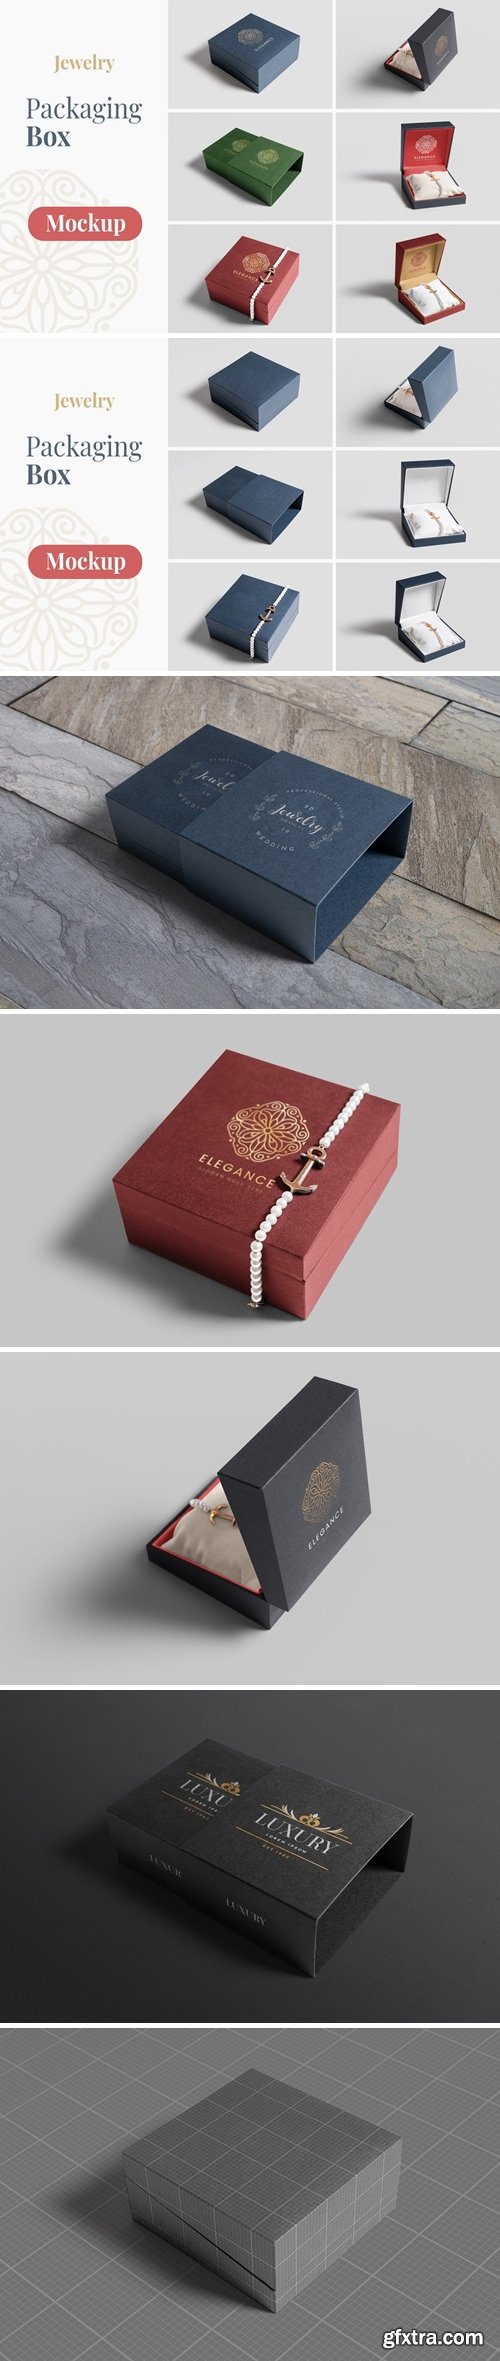 CM - Jewelry Packaging Box Mockups 4554066